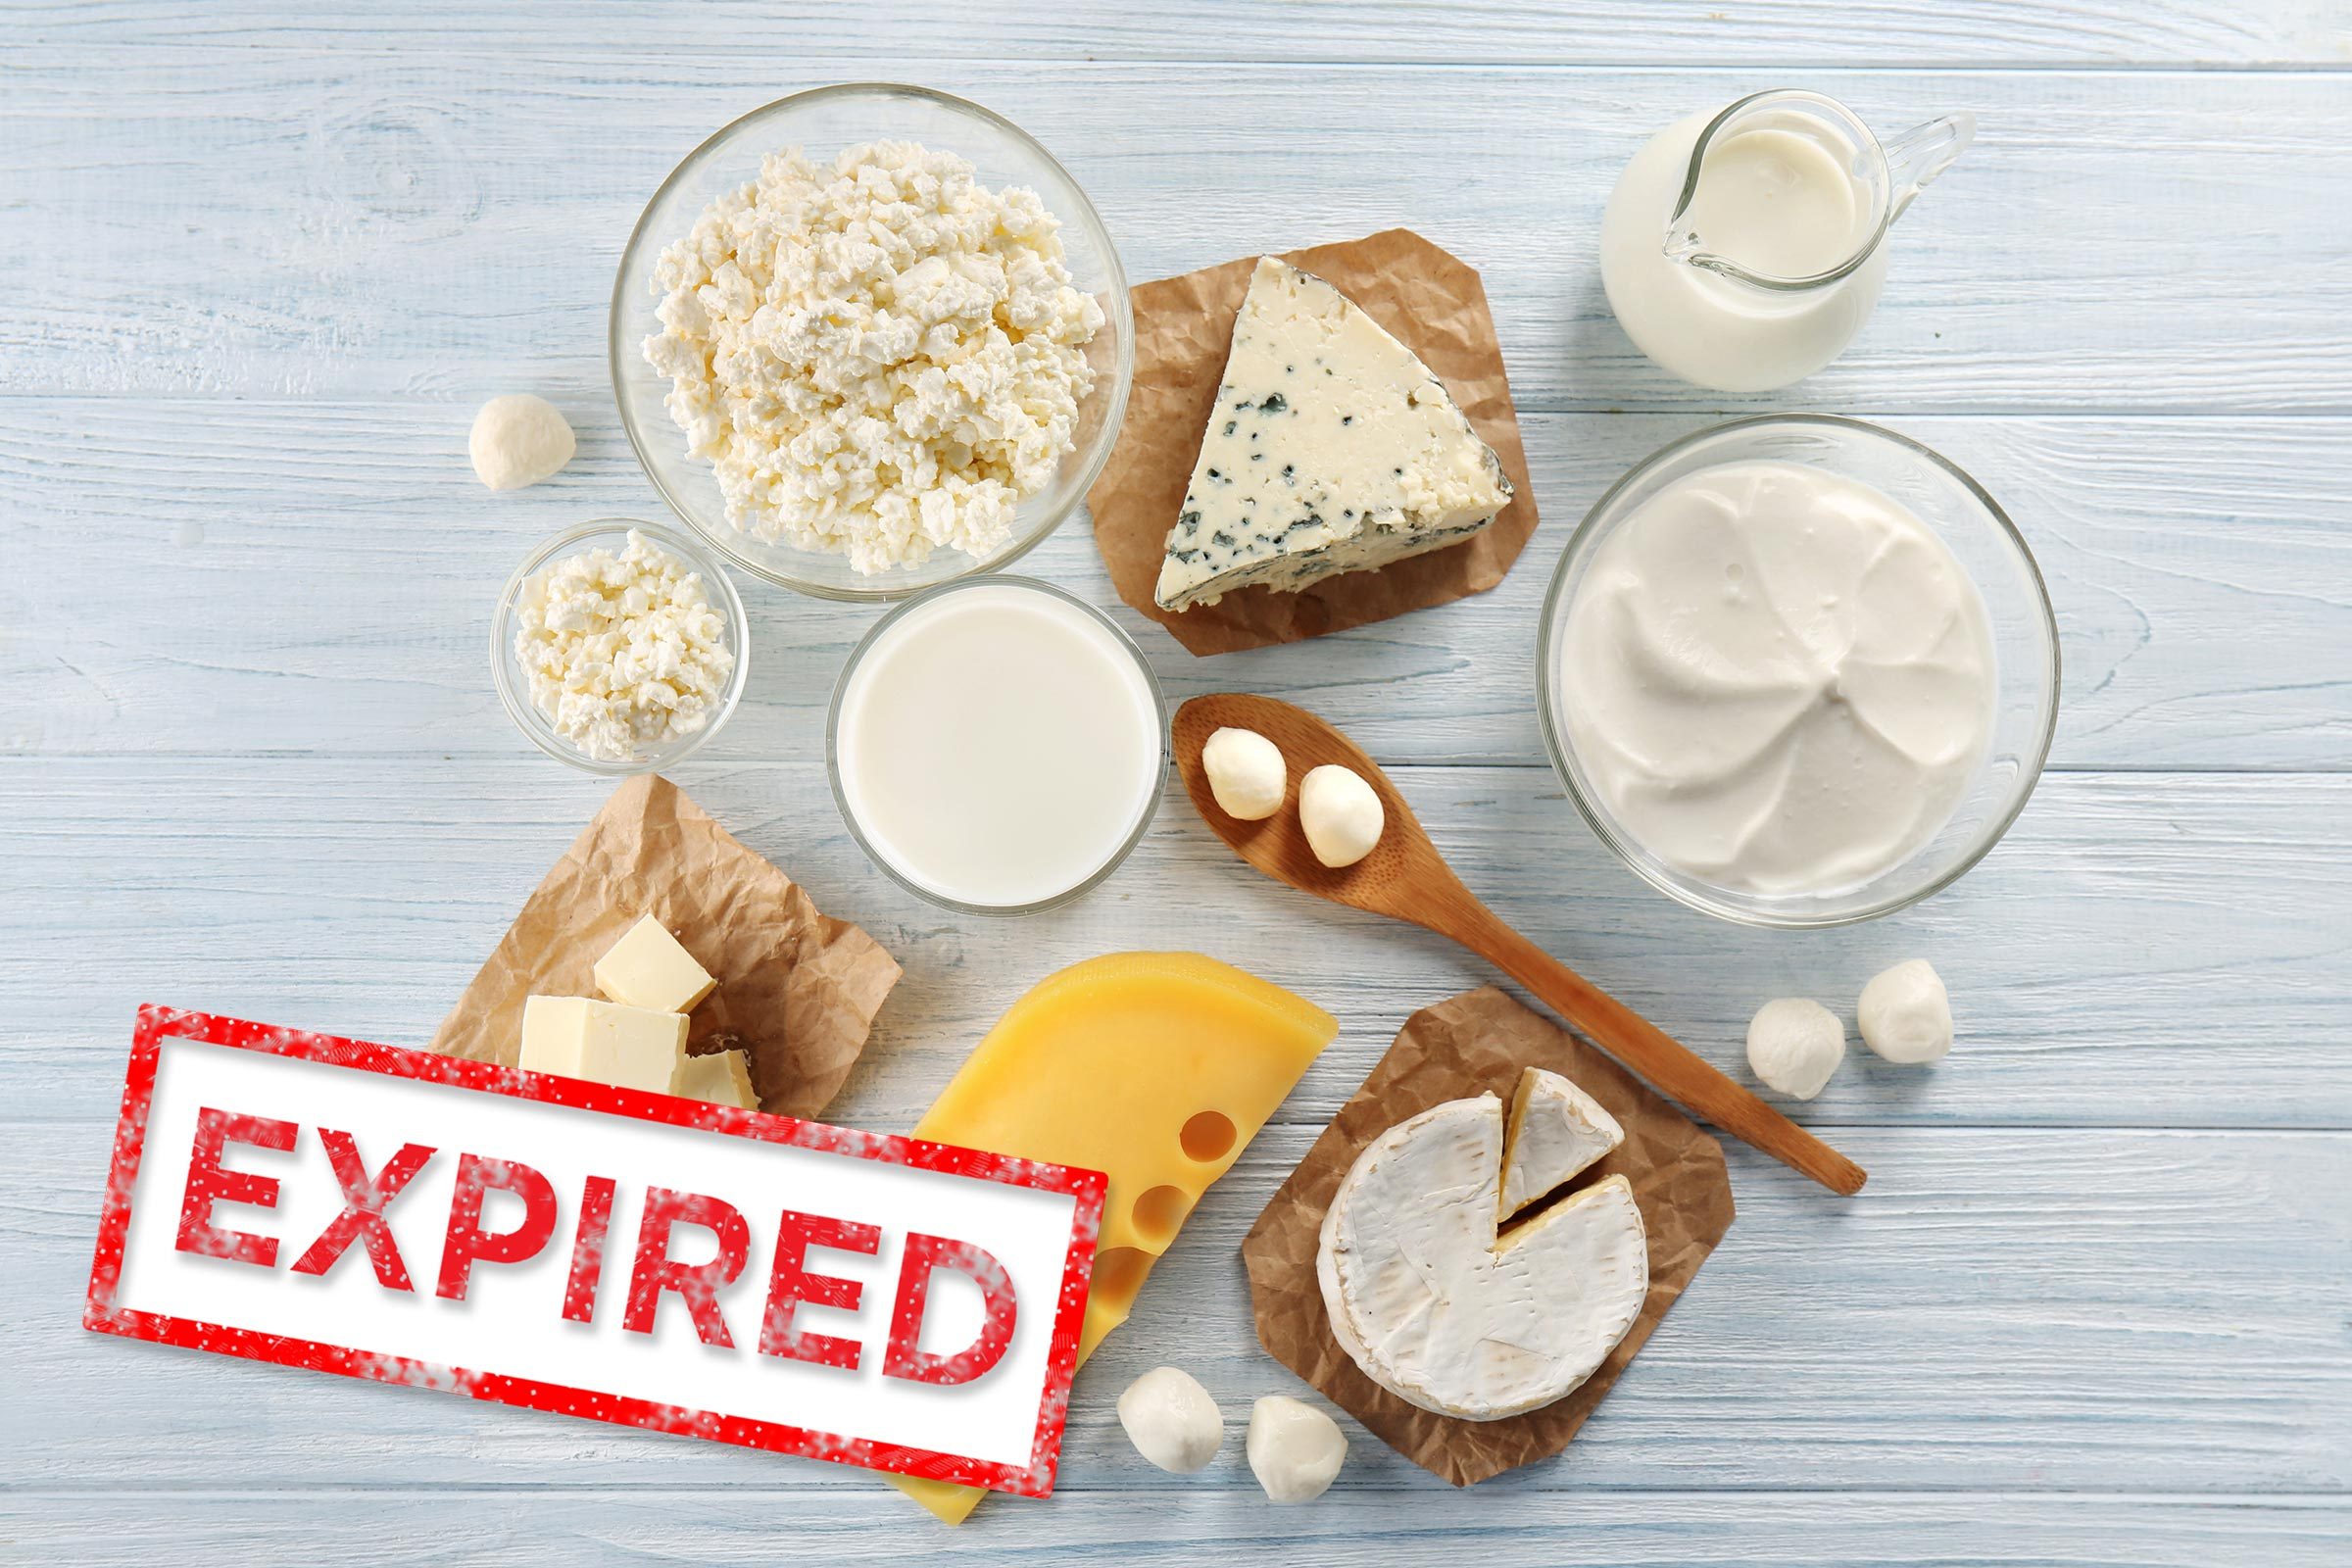 14 Foods You Can Safely Use Past Their Expiration Date